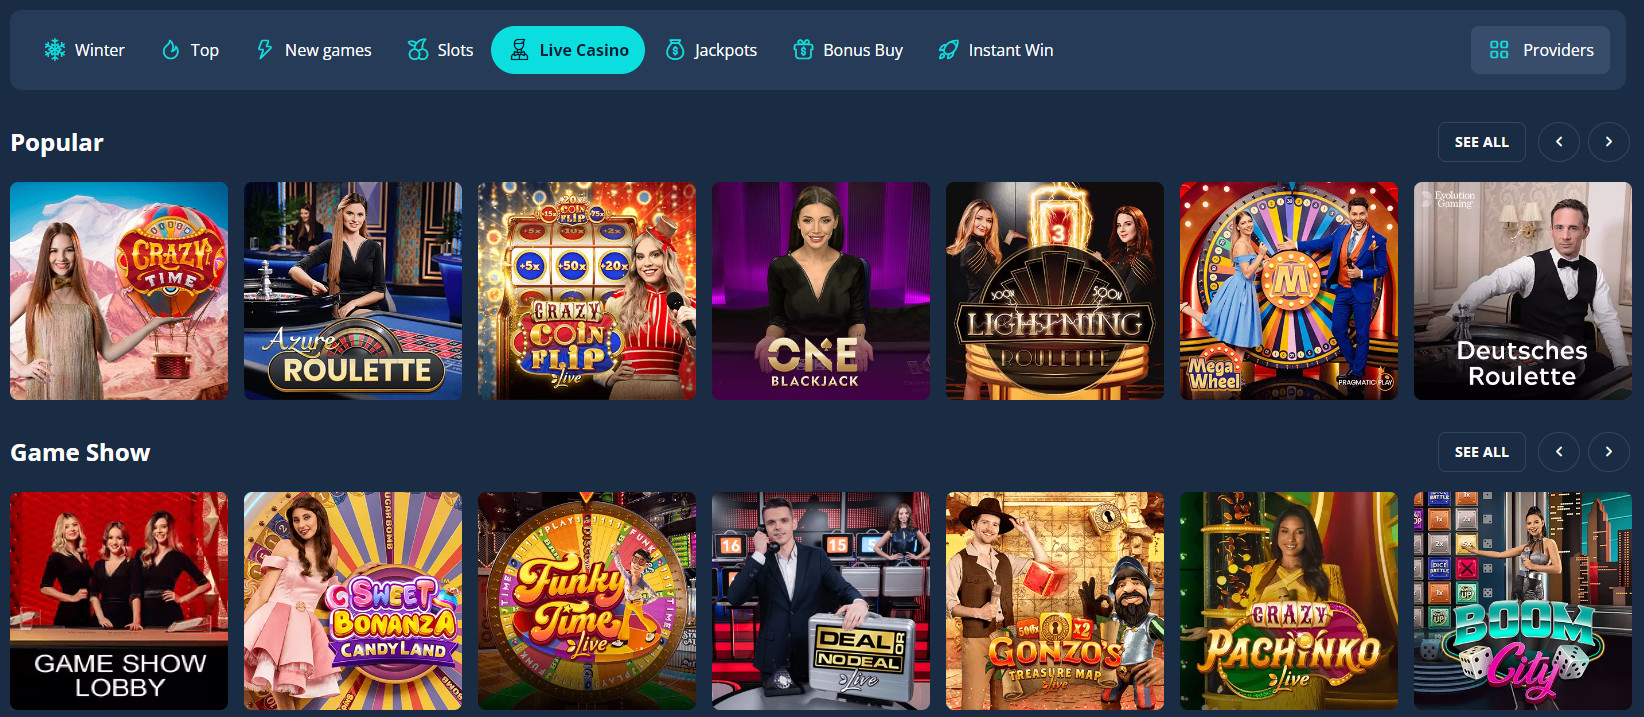 Live Games Section at Platincasino